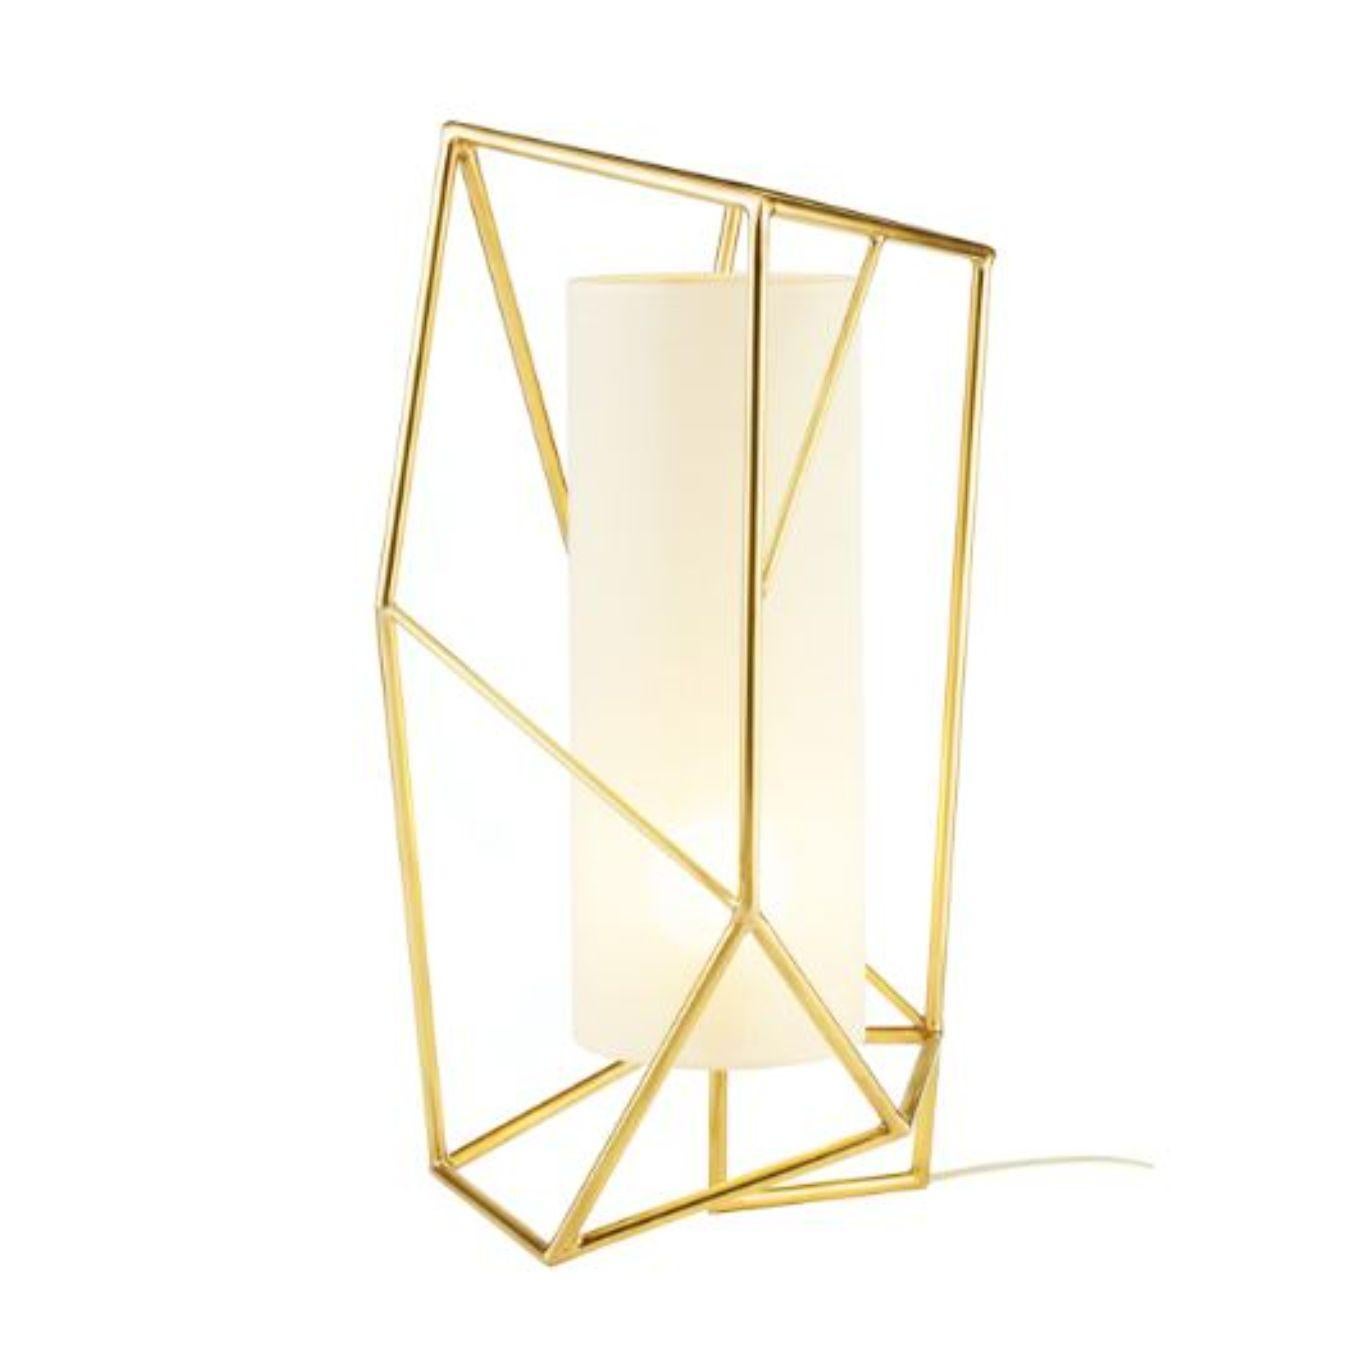 Brass Star table lamp by Dooq
Dimensions: W 33 x D 33 x H 72 cm
Materials: lacquered metal, polished or satin metal, brass.
abat-jour: linen
Also available in different colors and materials.

Information:
230V/50Hz
E27/1x10W LED
120V/60Hz
E26/1x10W